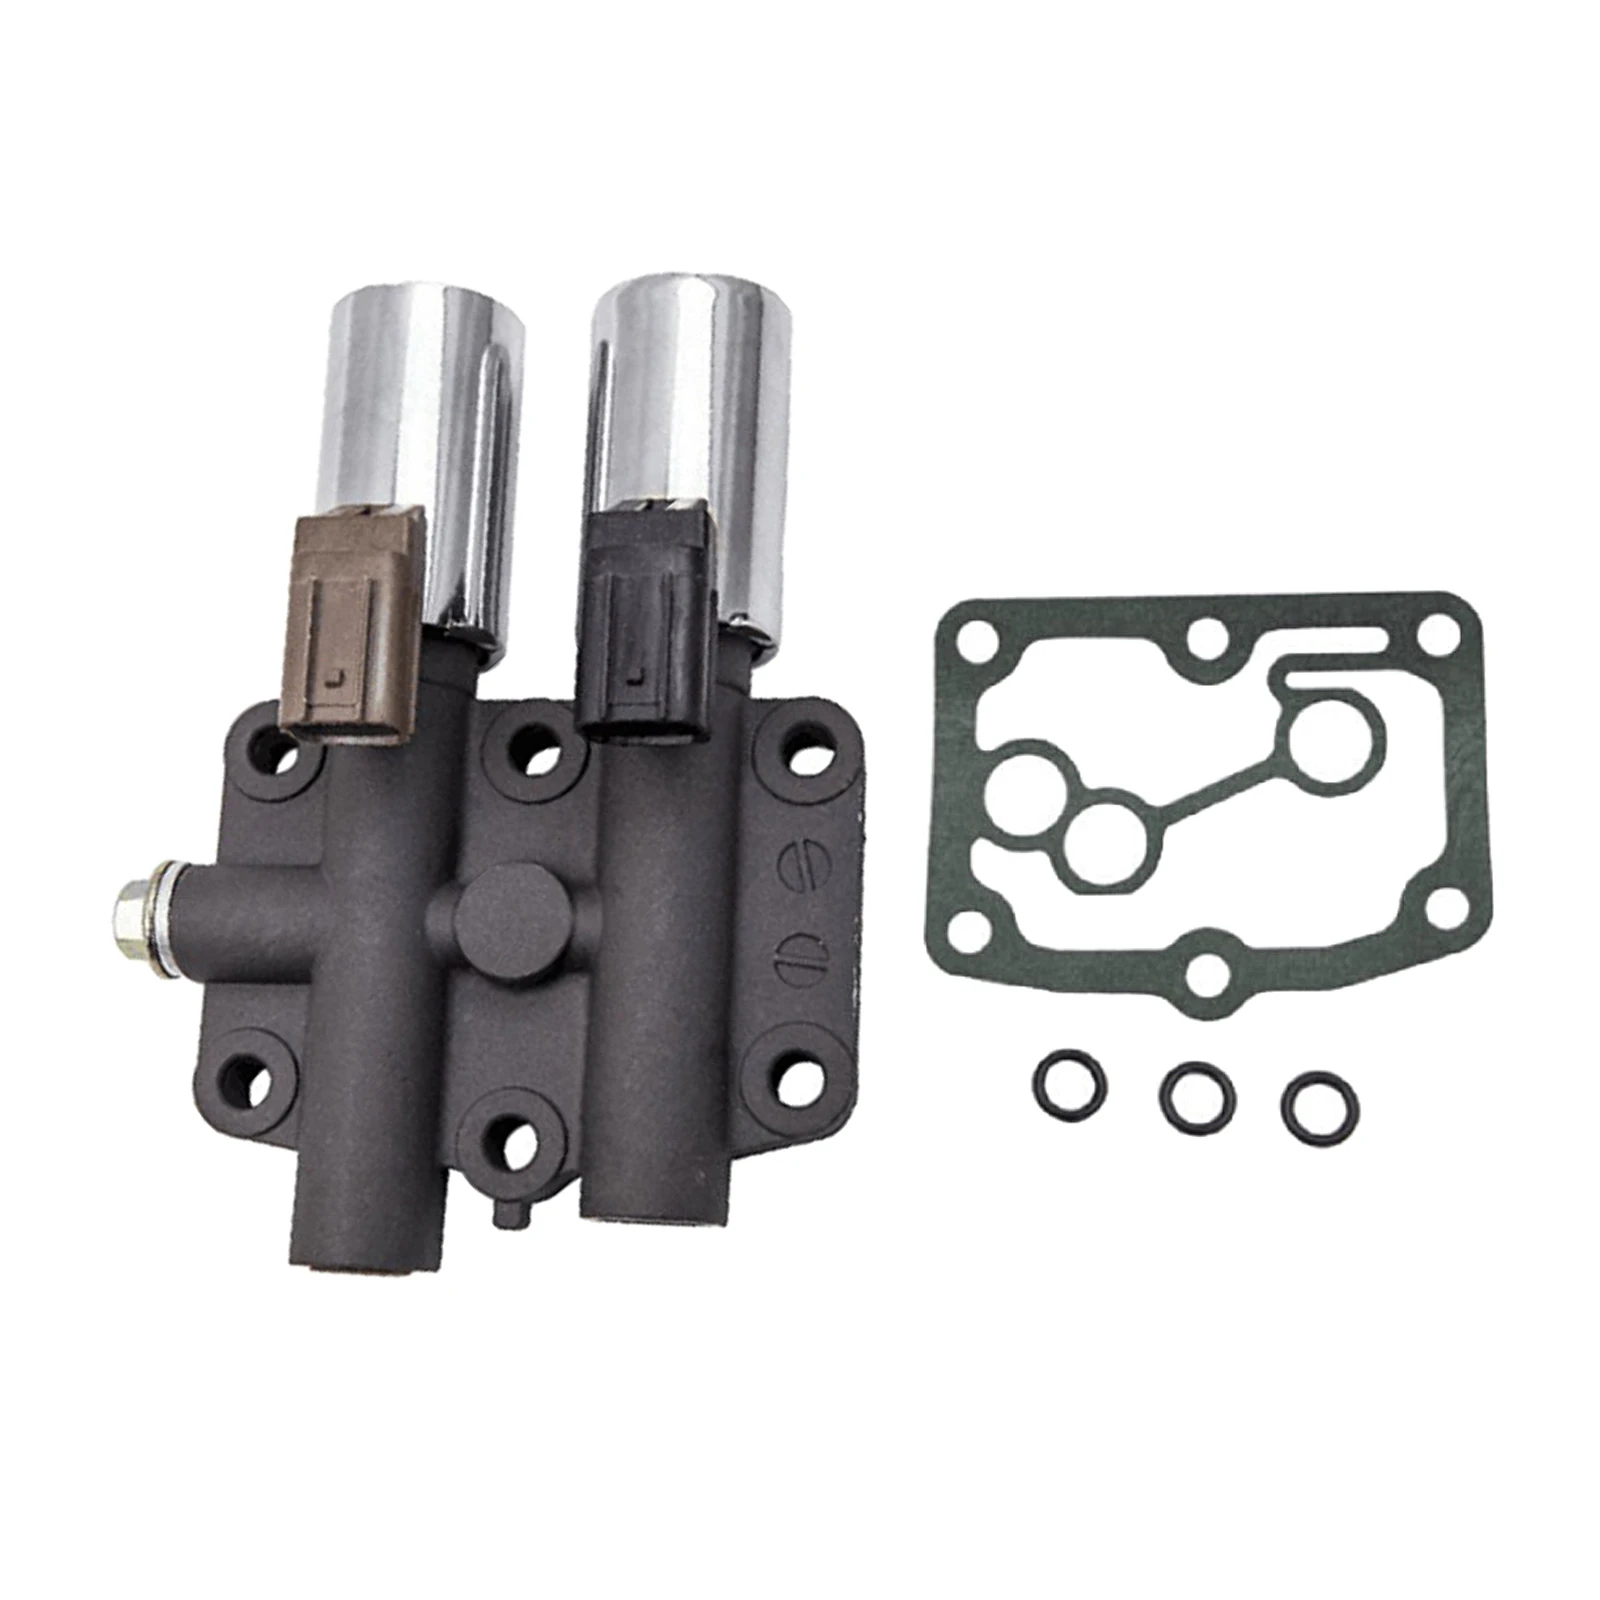 28250RDK014 Transmission Dual Linear Solenoid Replacement for Honda Accord Pilot Ridgeline